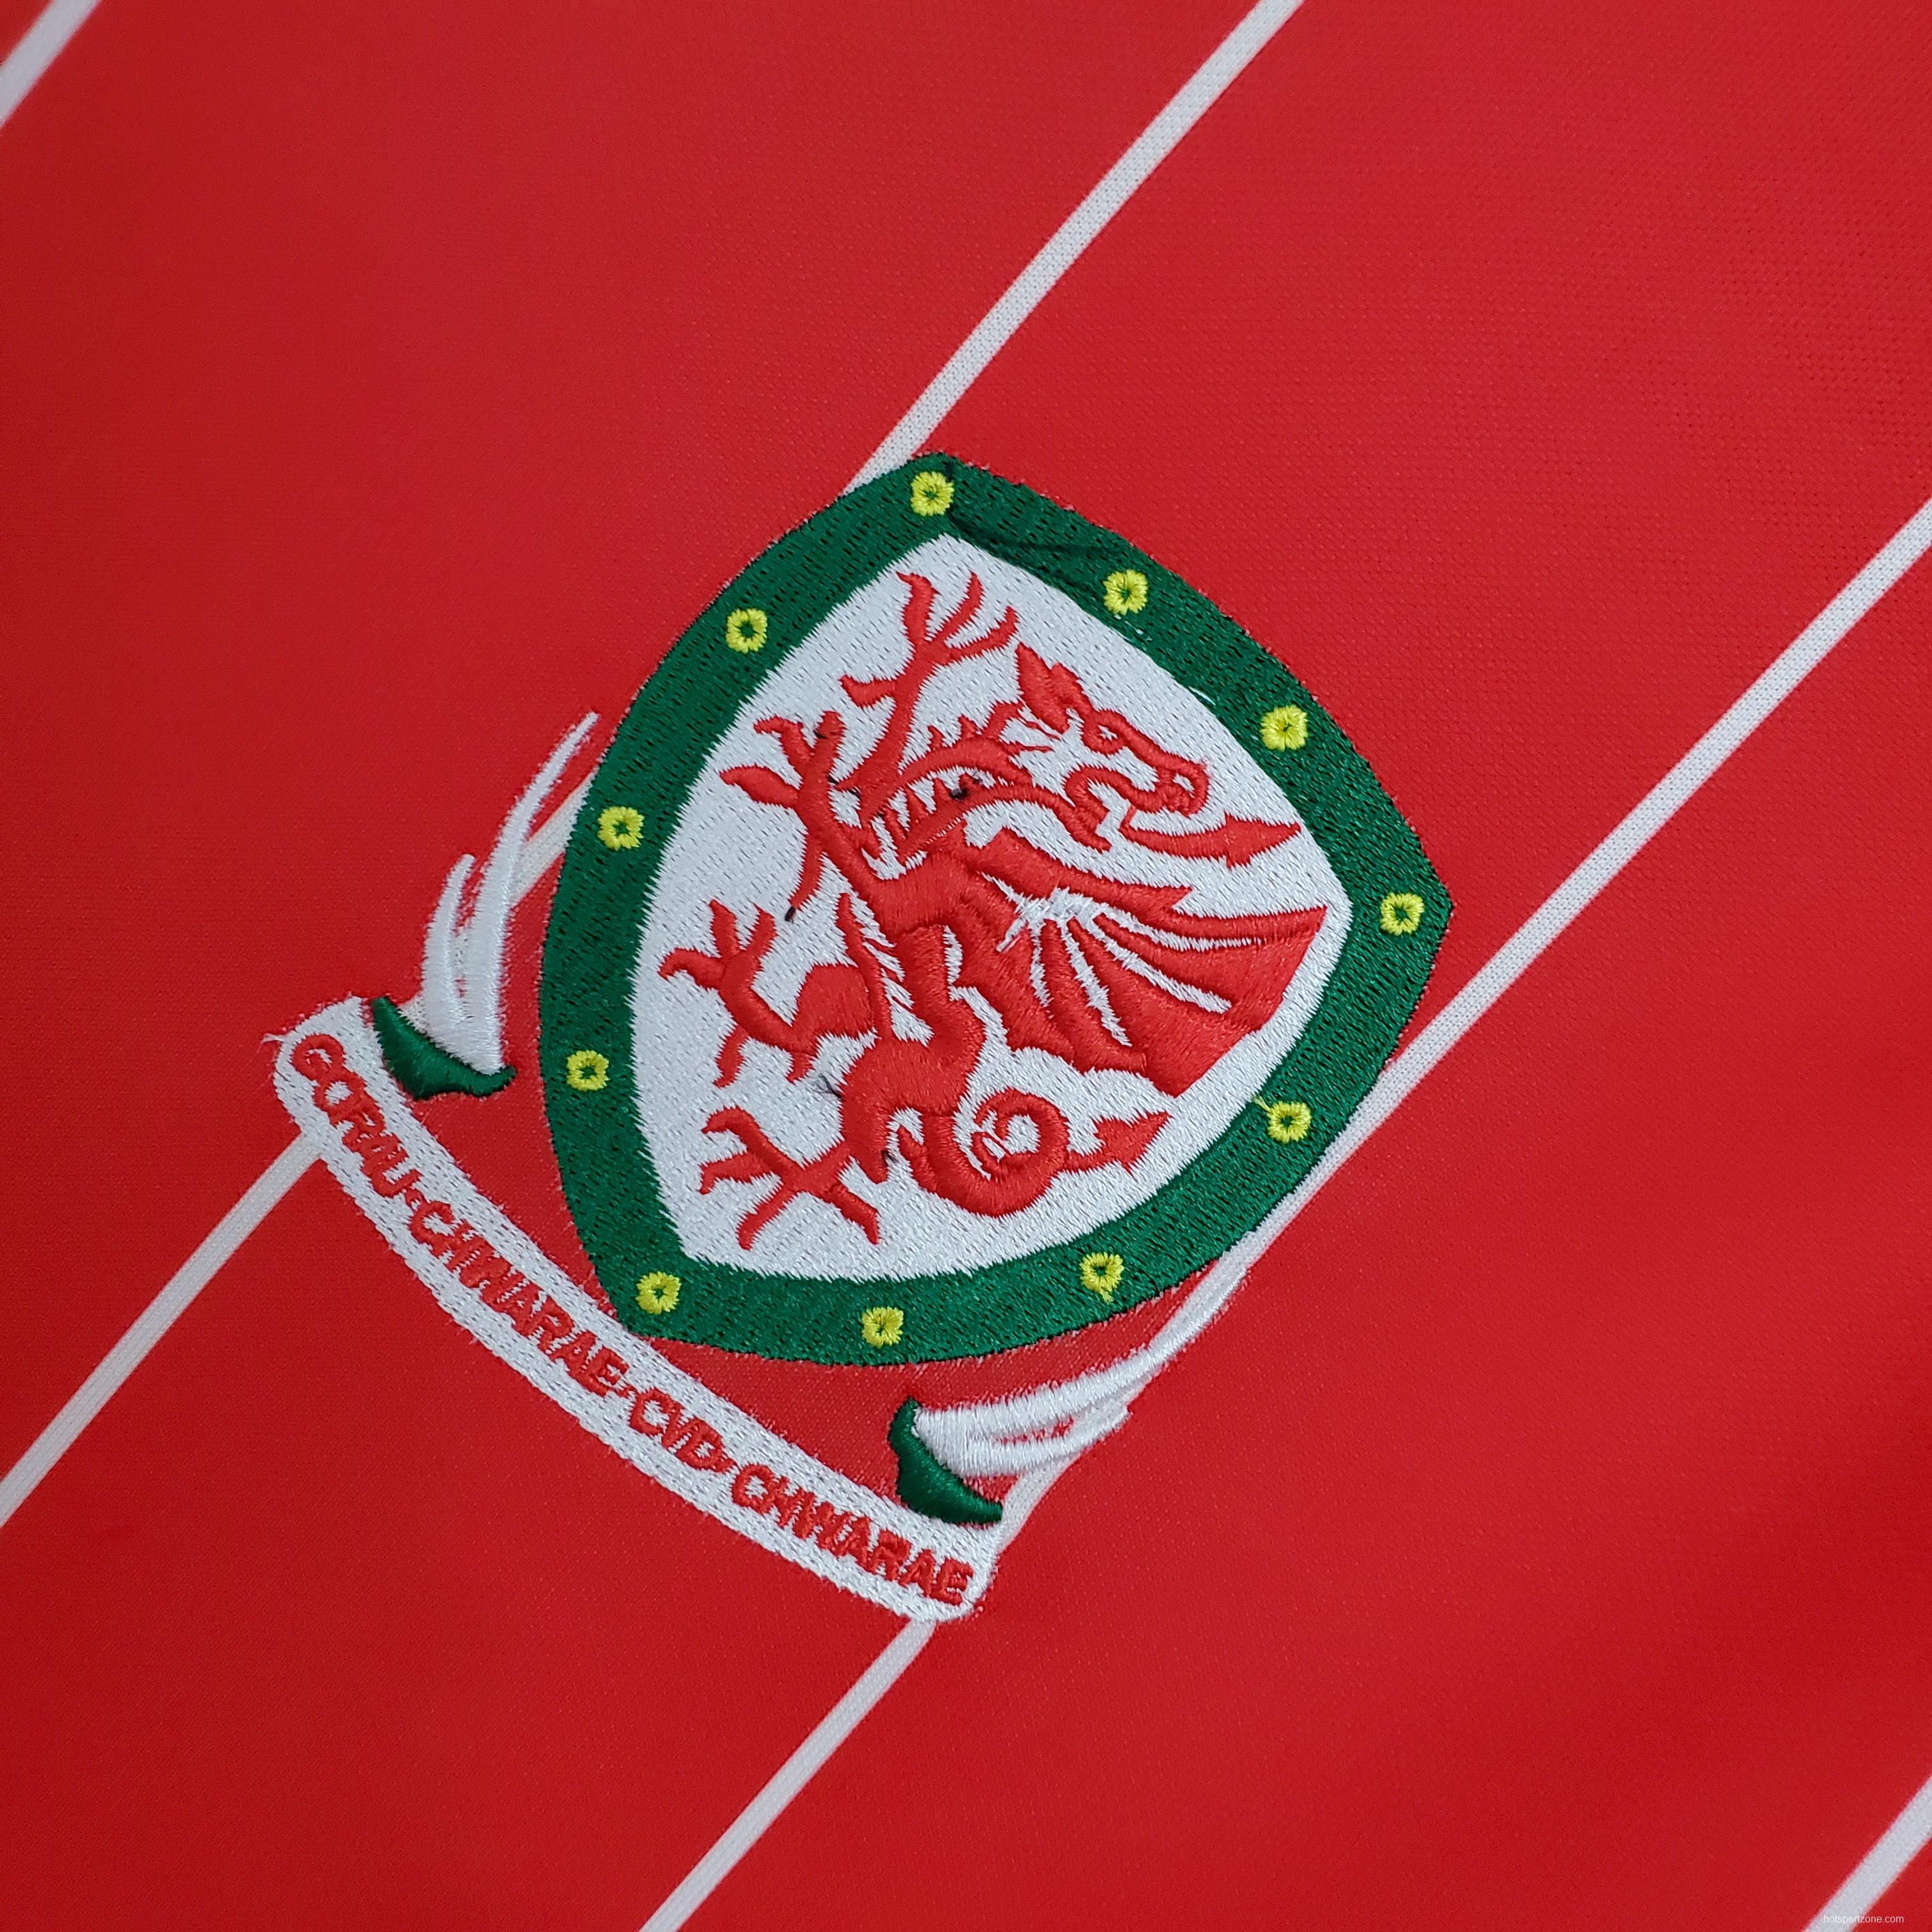 Retro Wales 15/16 home Soccer Jersey